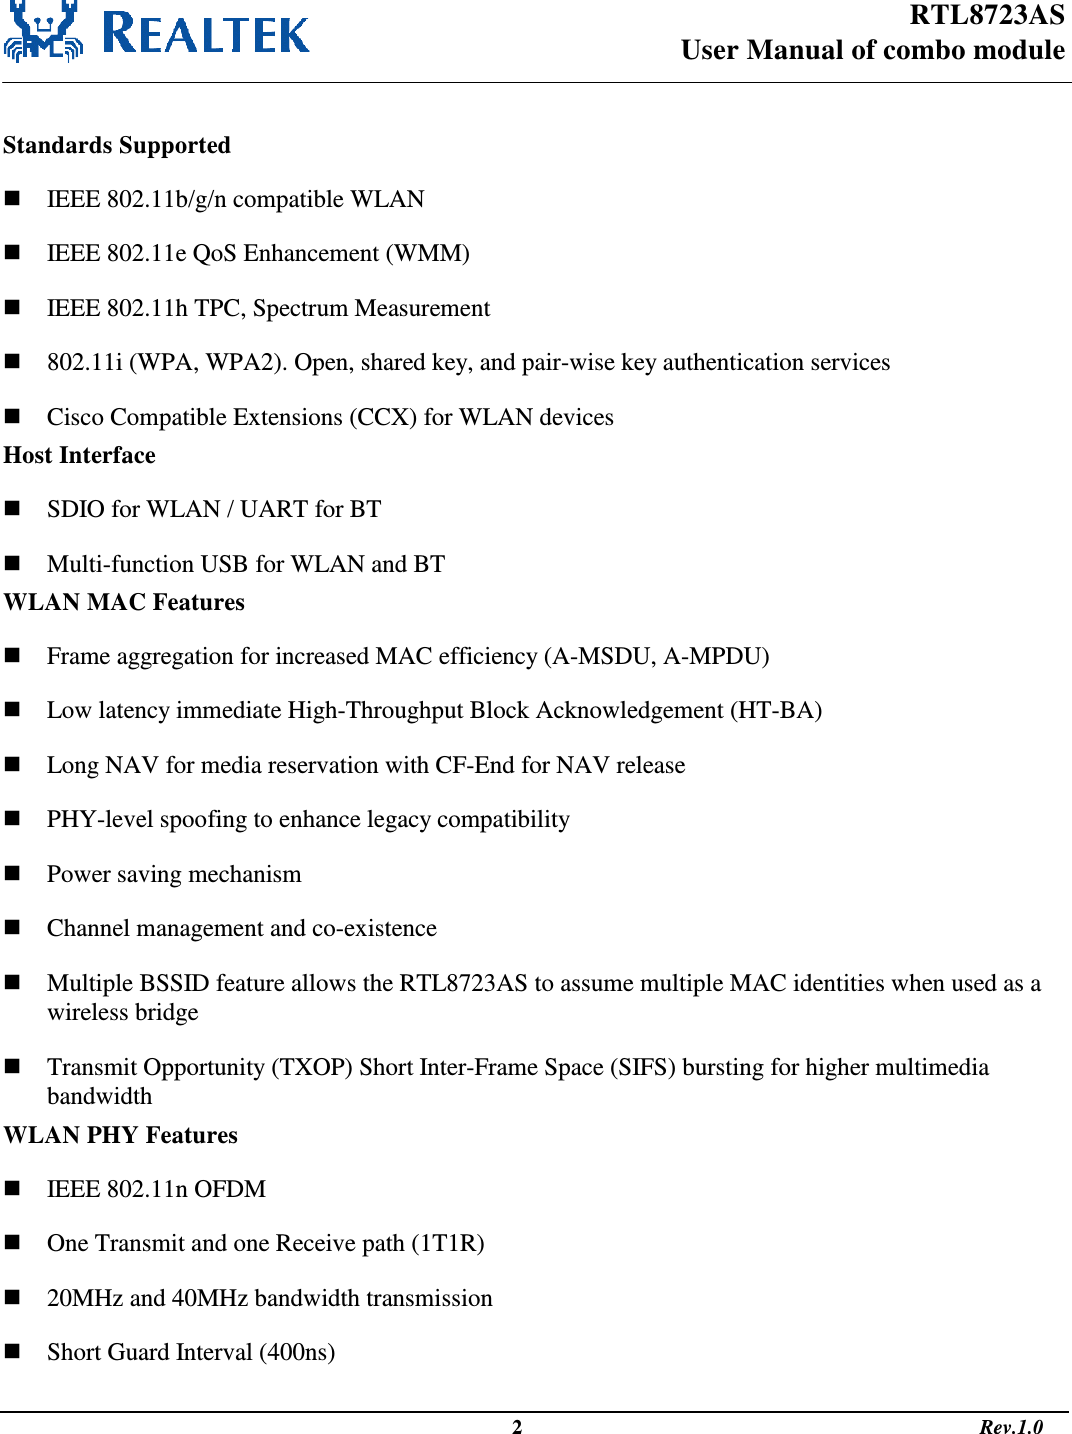 RTL8723AS User Manual of combo module                                                                                                  2                                                                                       Rev.1.0   Standards Supported  IEEE 802.11b/g/n compatible WLAN  IEEE 802.11e QoS Enhancement (WMM)  IEEE 802.11h TPC, Spectrum Measurement  802.11i (WPA, WPA2). Open, shared key, and pair-wise key authentication services  Cisco Compatible Extensions (CCX) for WLAN devices Host Interface  SDIO for WLAN / UART for BT  Multi-function USB for WLAN and BT WLAN MAC Features  Frame aggregation for increased MAC efficiency (A-MSDU, A-MPDU)  Low latency immediate High-Throughput Block Acknowledgement (HT-BA)  Long NAV for media reservation with CF-End for NAV release  PHY-level spoofing to enhance legacy compatibility  Power saving mechanism  Channel management and co-existence  Multiple BSSID feature allows the RTL8723AS to assume multiple MAC identities when used as a wireless bridge  Transmit Opportunity (TXOP) Short Inter-Frame Space (SIFS) bursting for higher multimedia bandwidth WLAN PHY Features  IEEE 802.11n OFDM  One Transmit and one Receive path (1T1R)  20MHz and 40MHz bandwidth transmission  Short Guard Interval (400ns) 